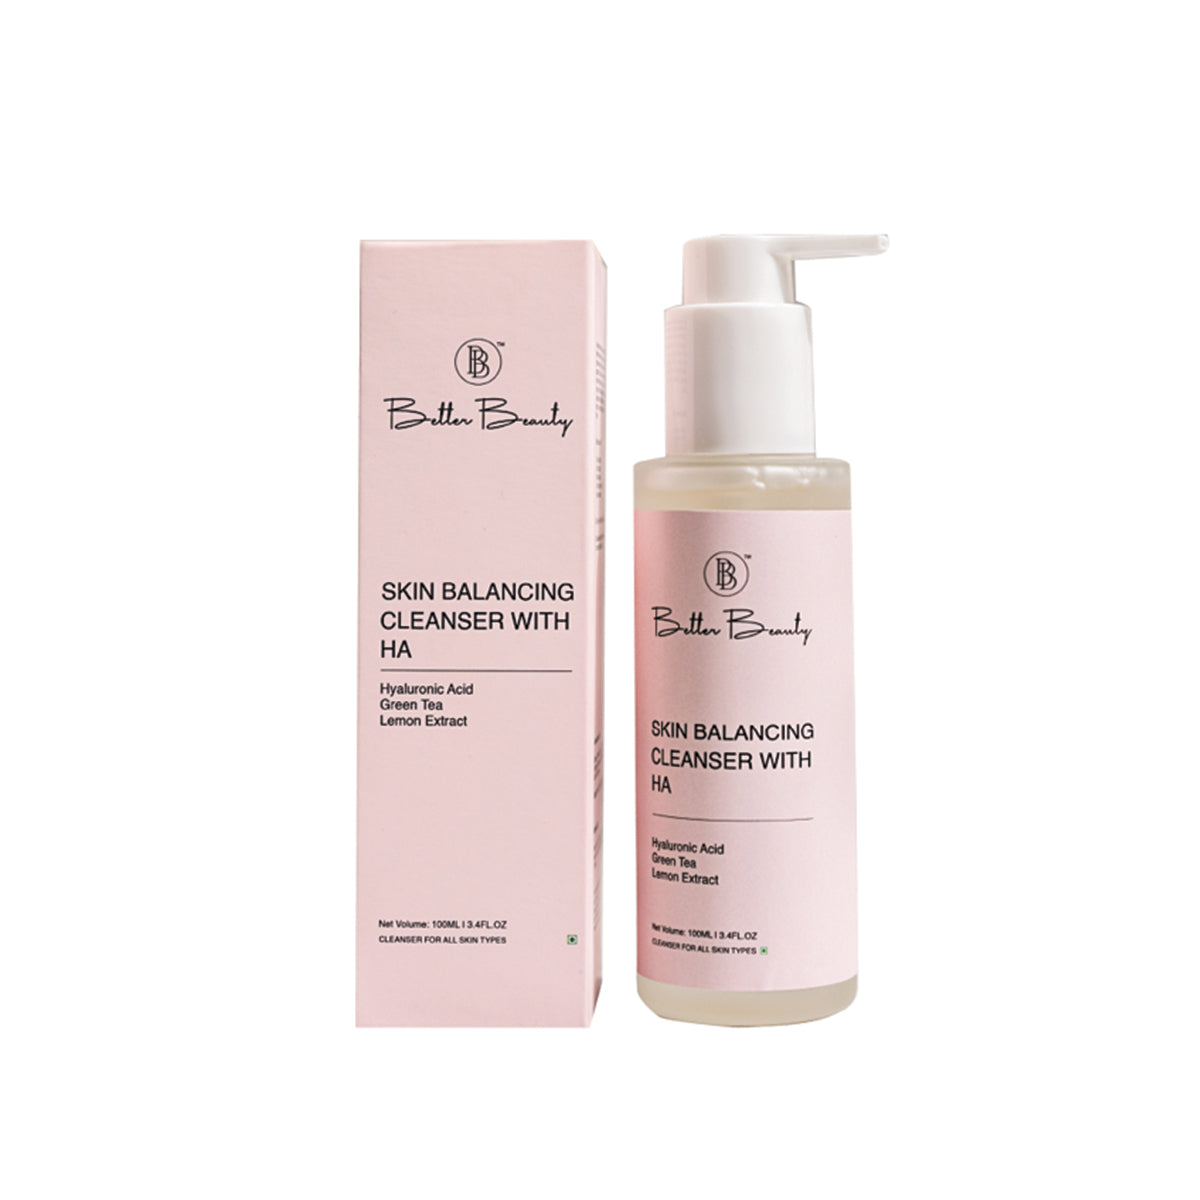 Better Beauty | Buy Skin Balancing Cleanser with HA